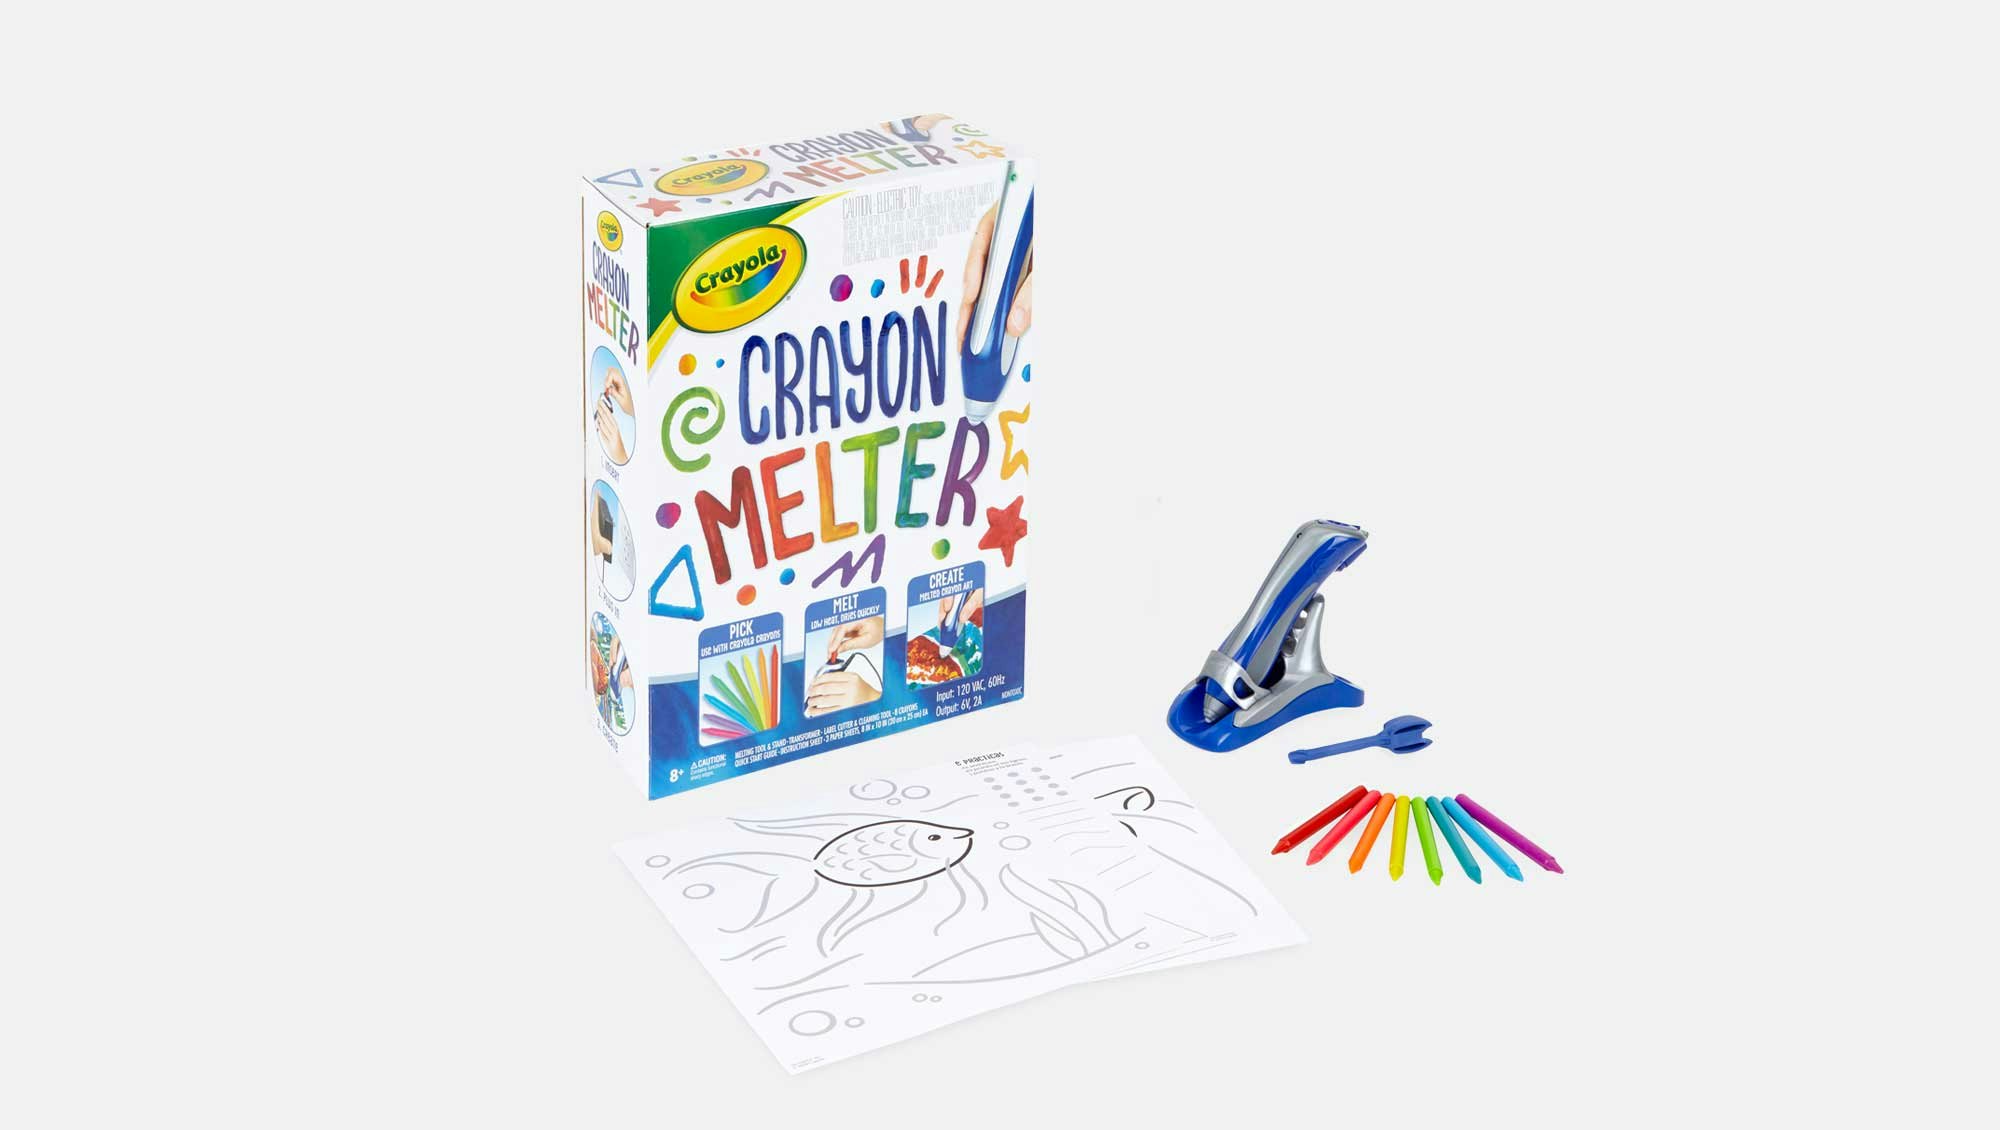 BRAND NEW GIFT NEW CRAYOLA SHADOW FX COLOUR PROJECTOR DRAWING ART PENS 